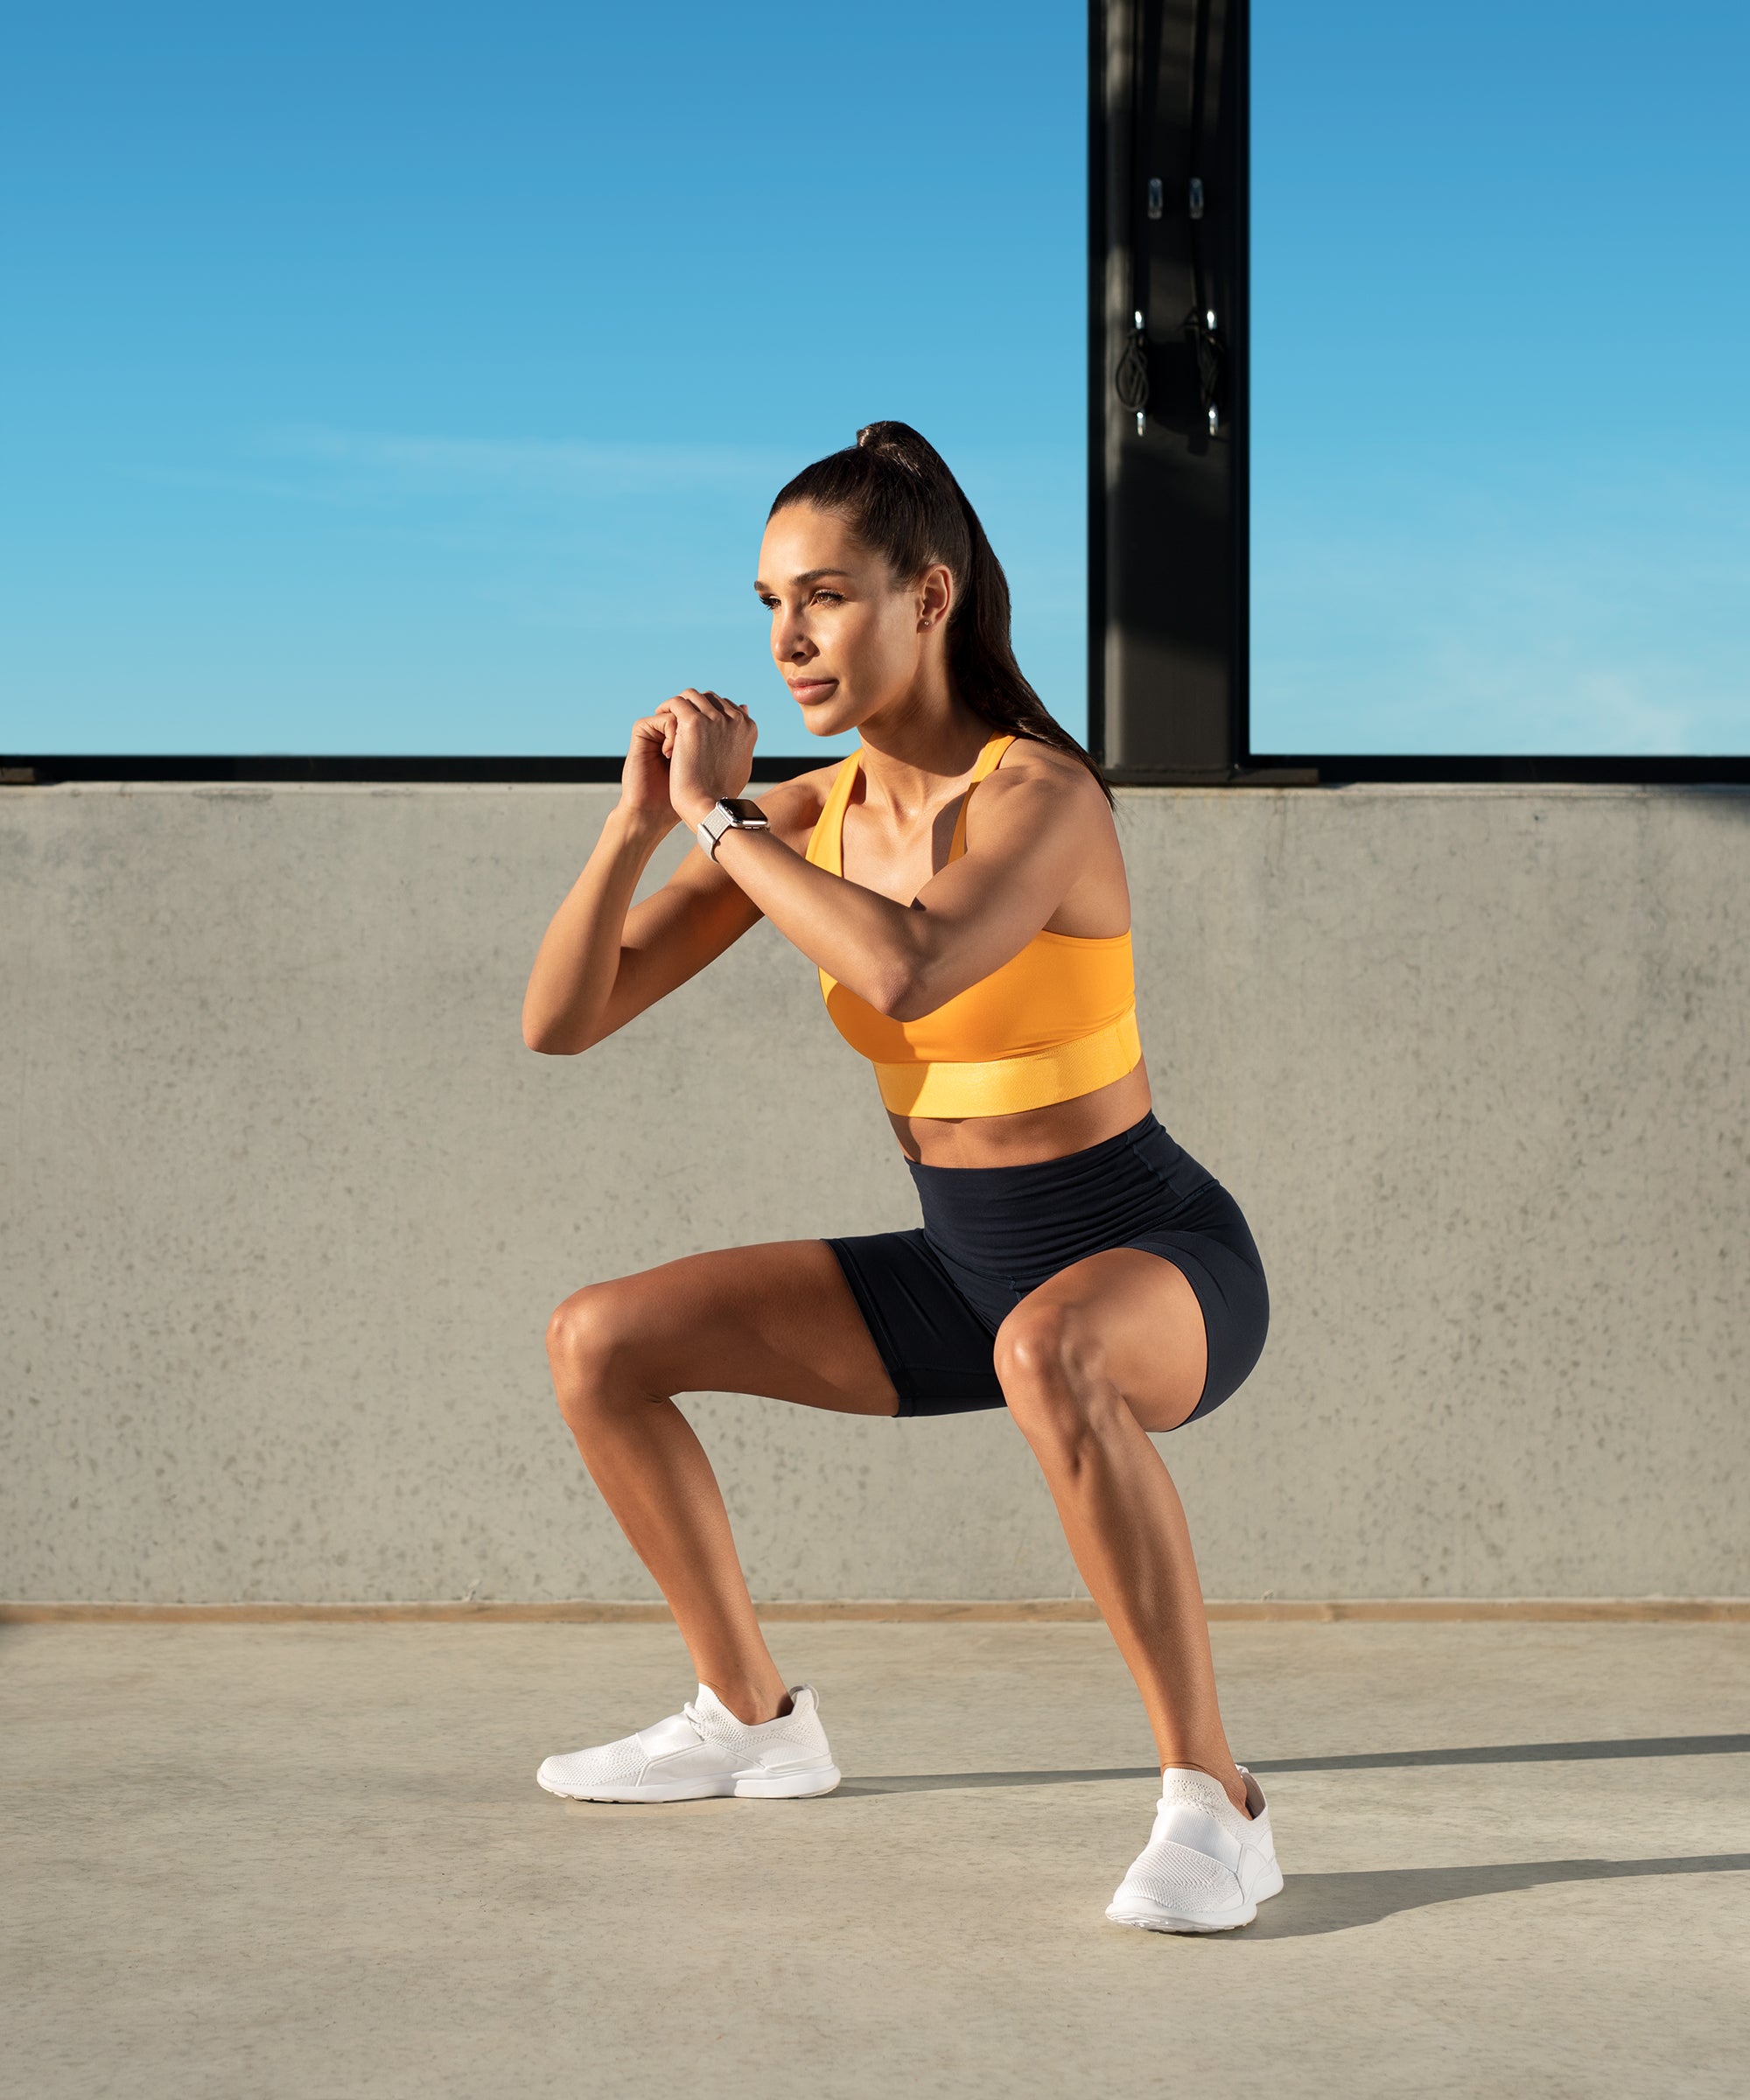 Trainer Kayla Itsines Shares a Week's Worth of At-Home Routines